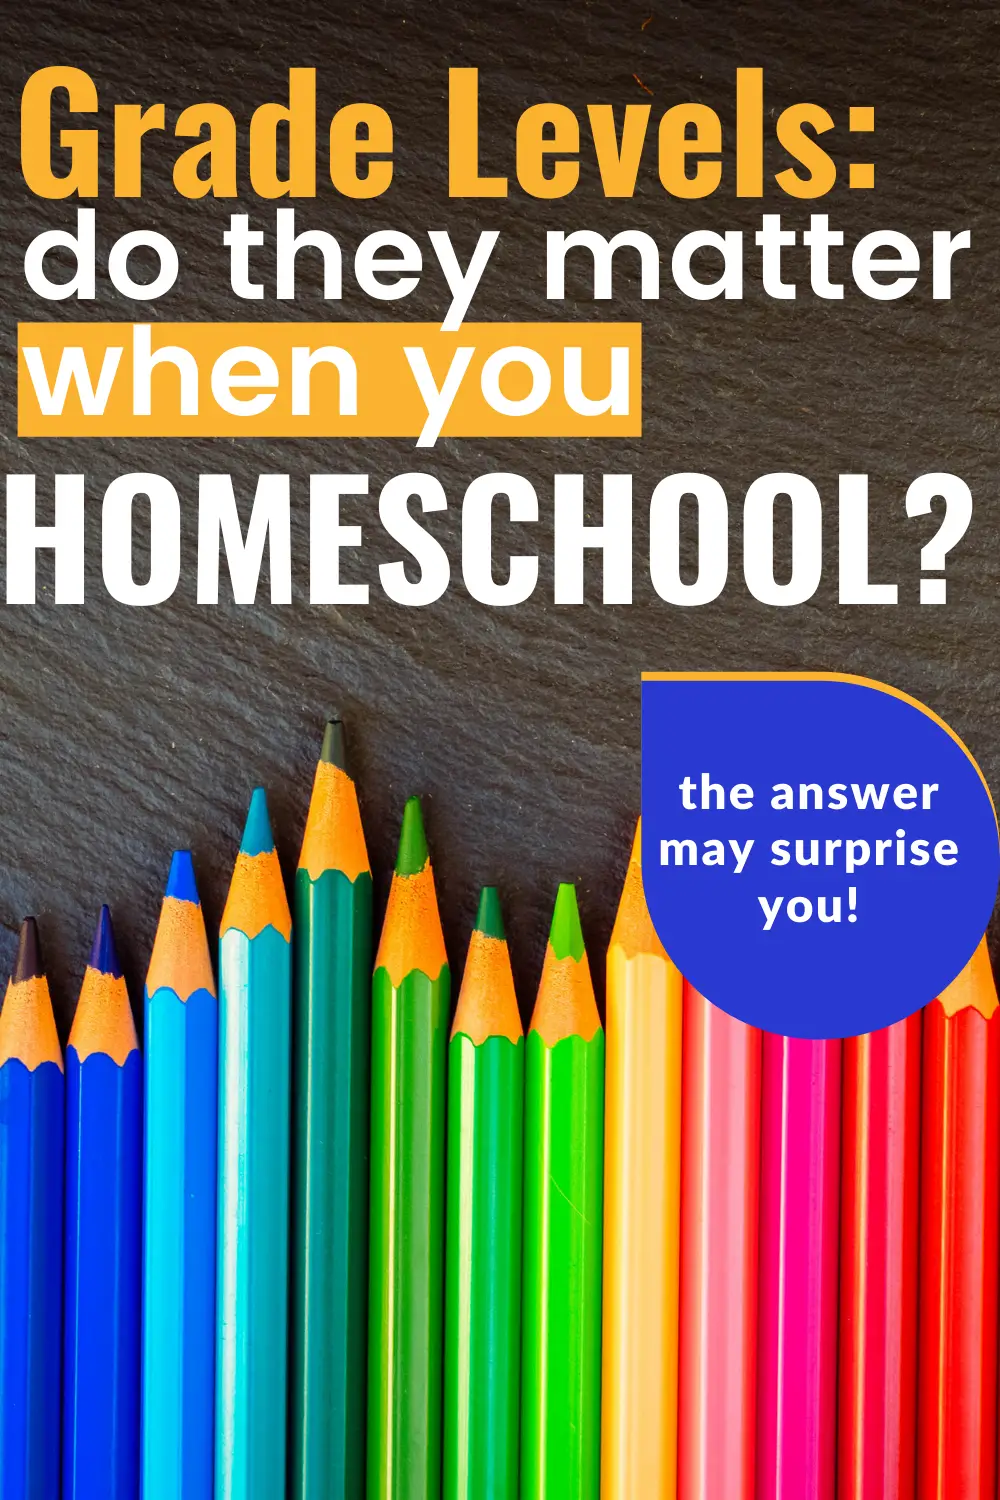 Are grade levels important? Does it matter what grade kids are in? One homeschool mom discusses when "what grade are you in" matters and when it doesn't.